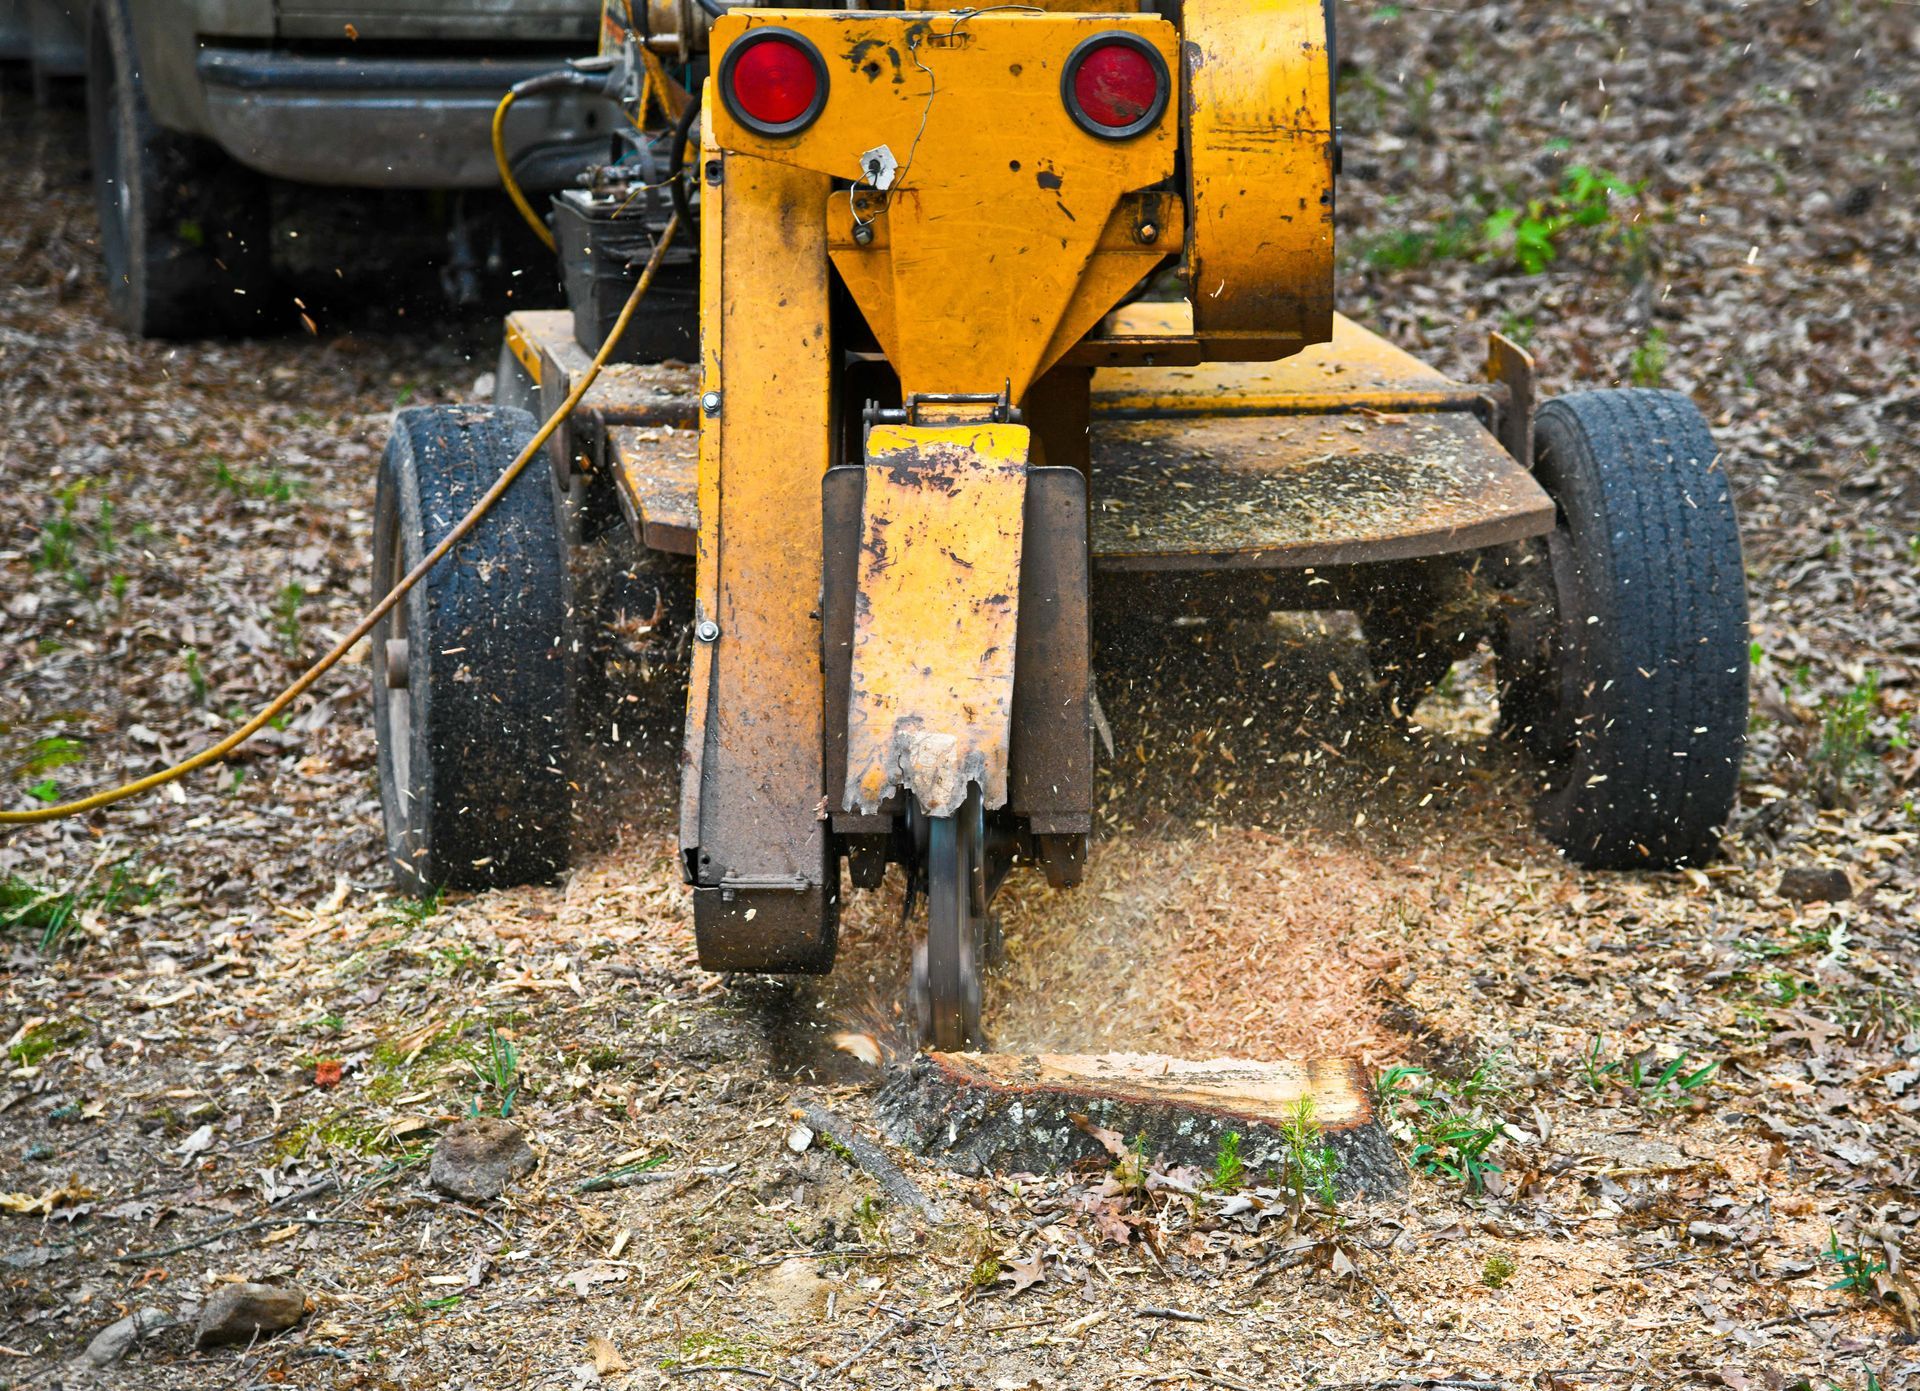 Grinding the stump below the surface to prevent tripping hazards and regrowth.